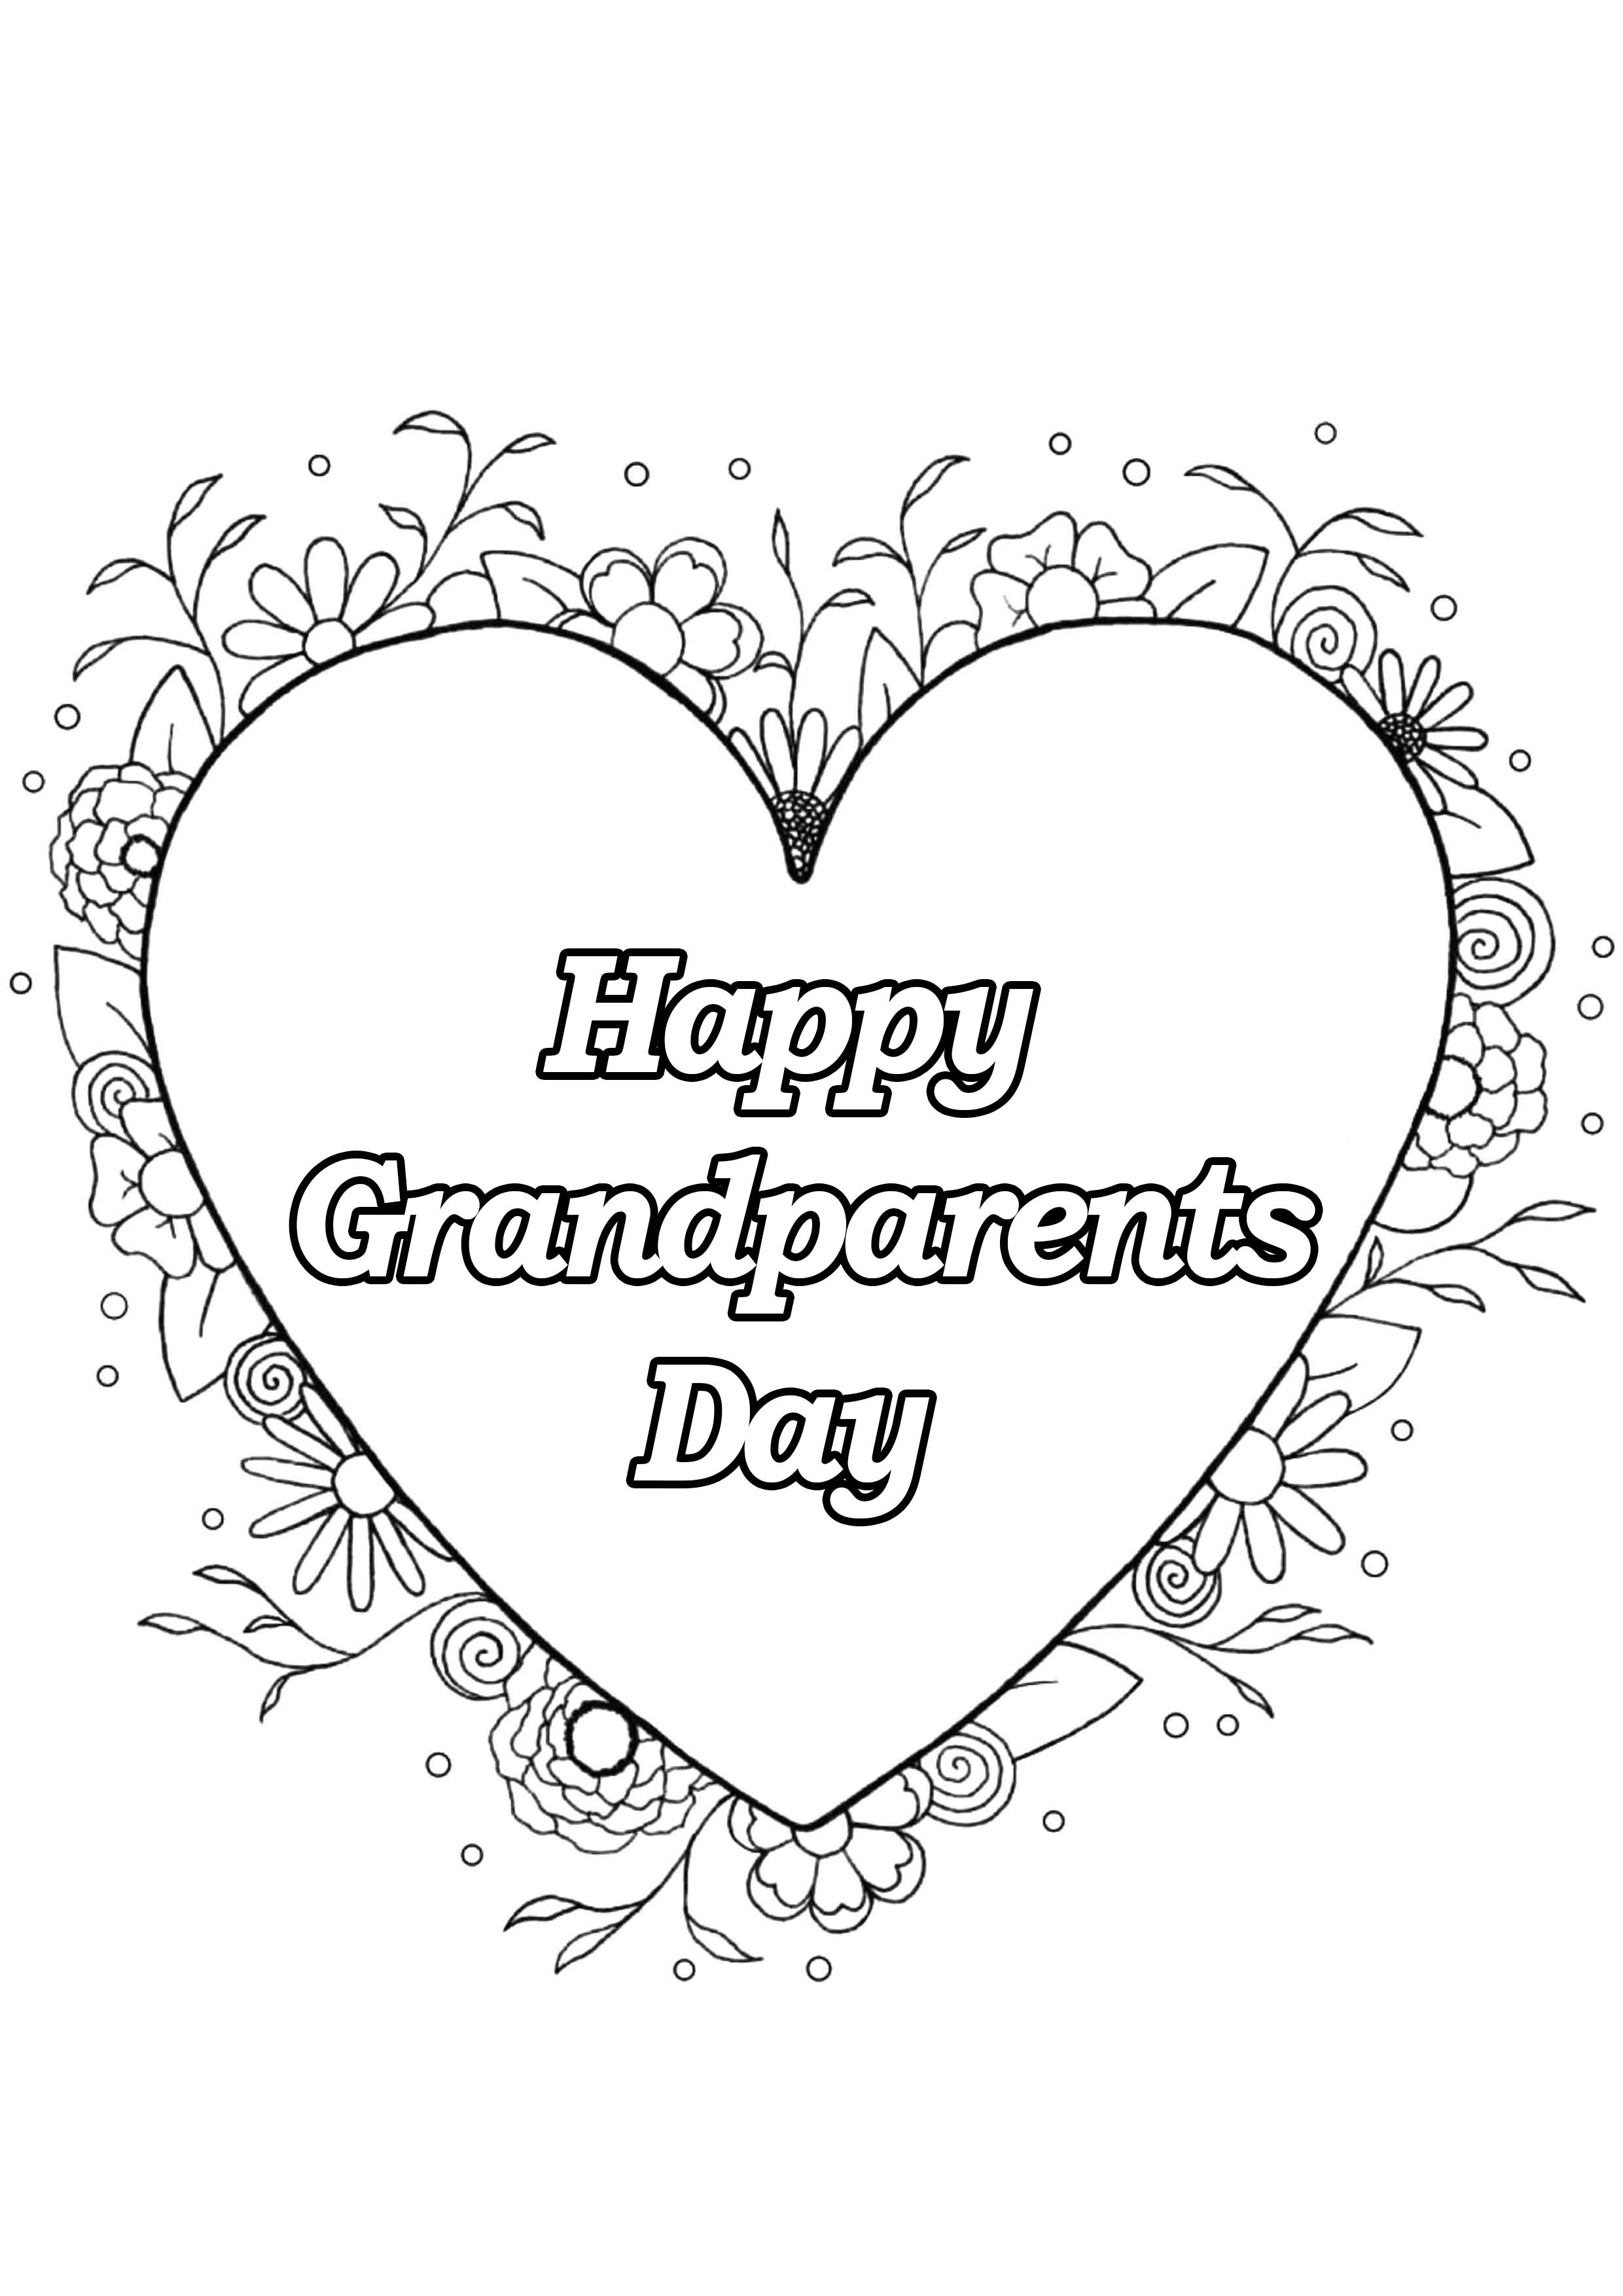 grandparents-day-4-gr-parents-day-adult-coloring-pages